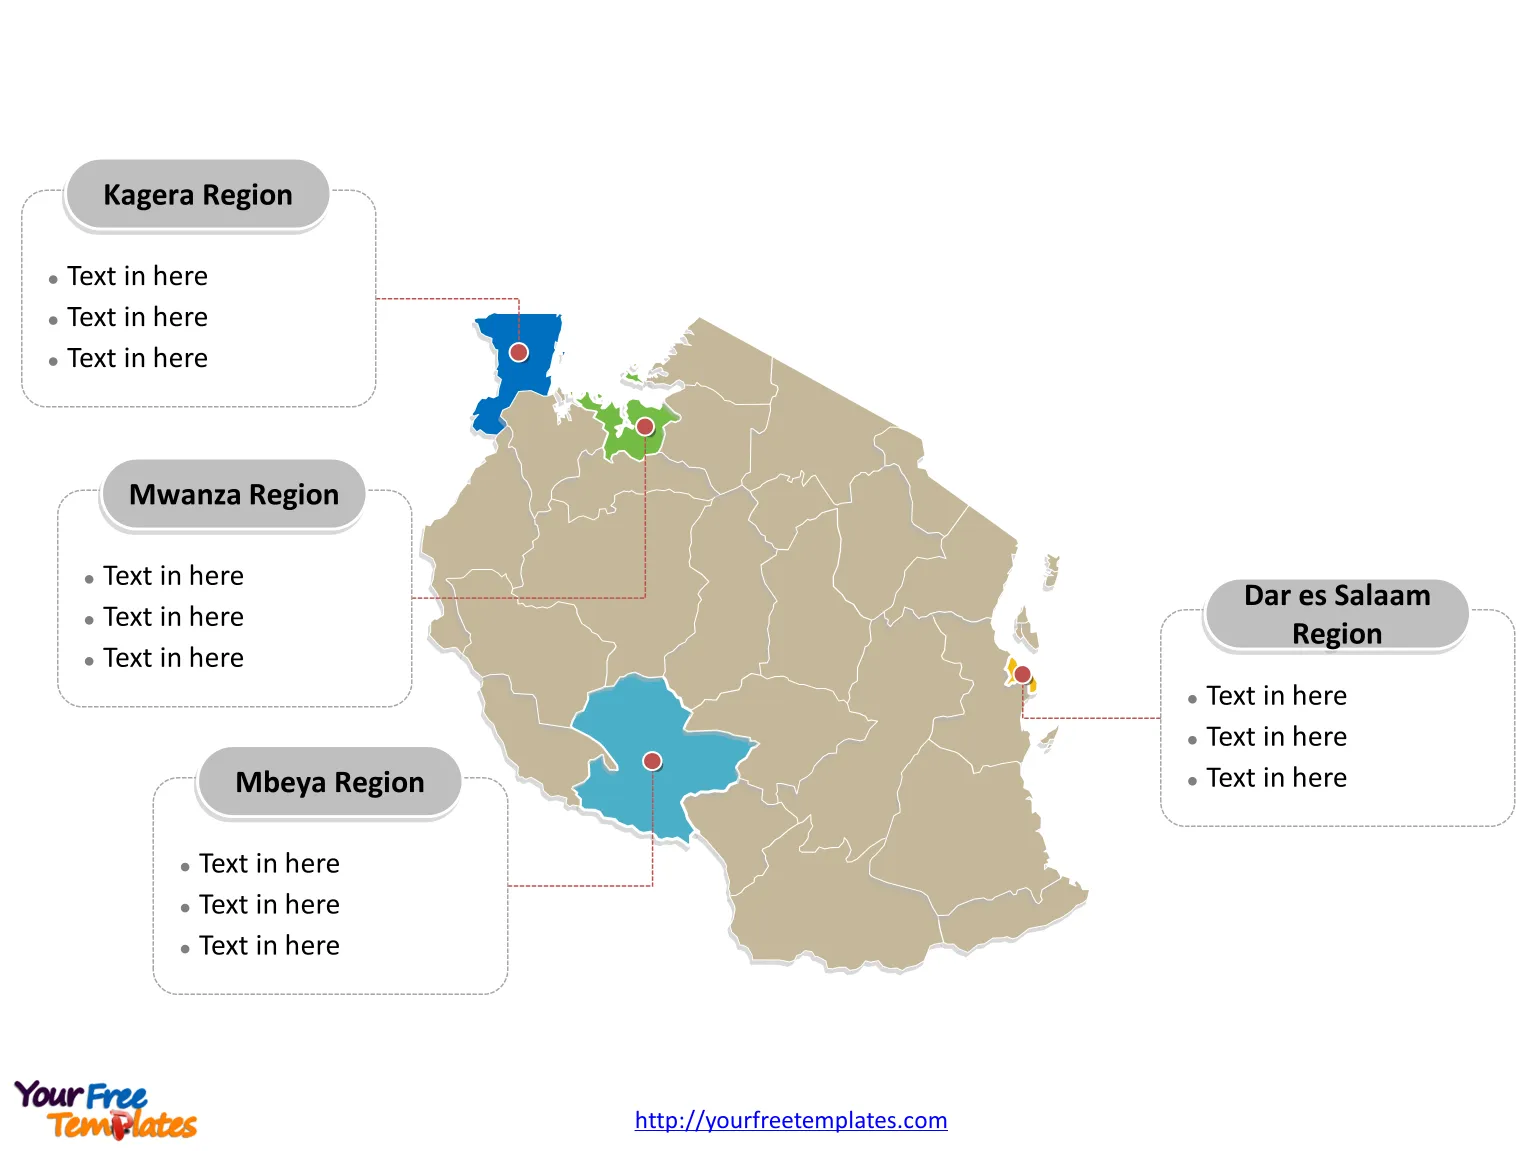 Tanzania Political map labeled with major Regions